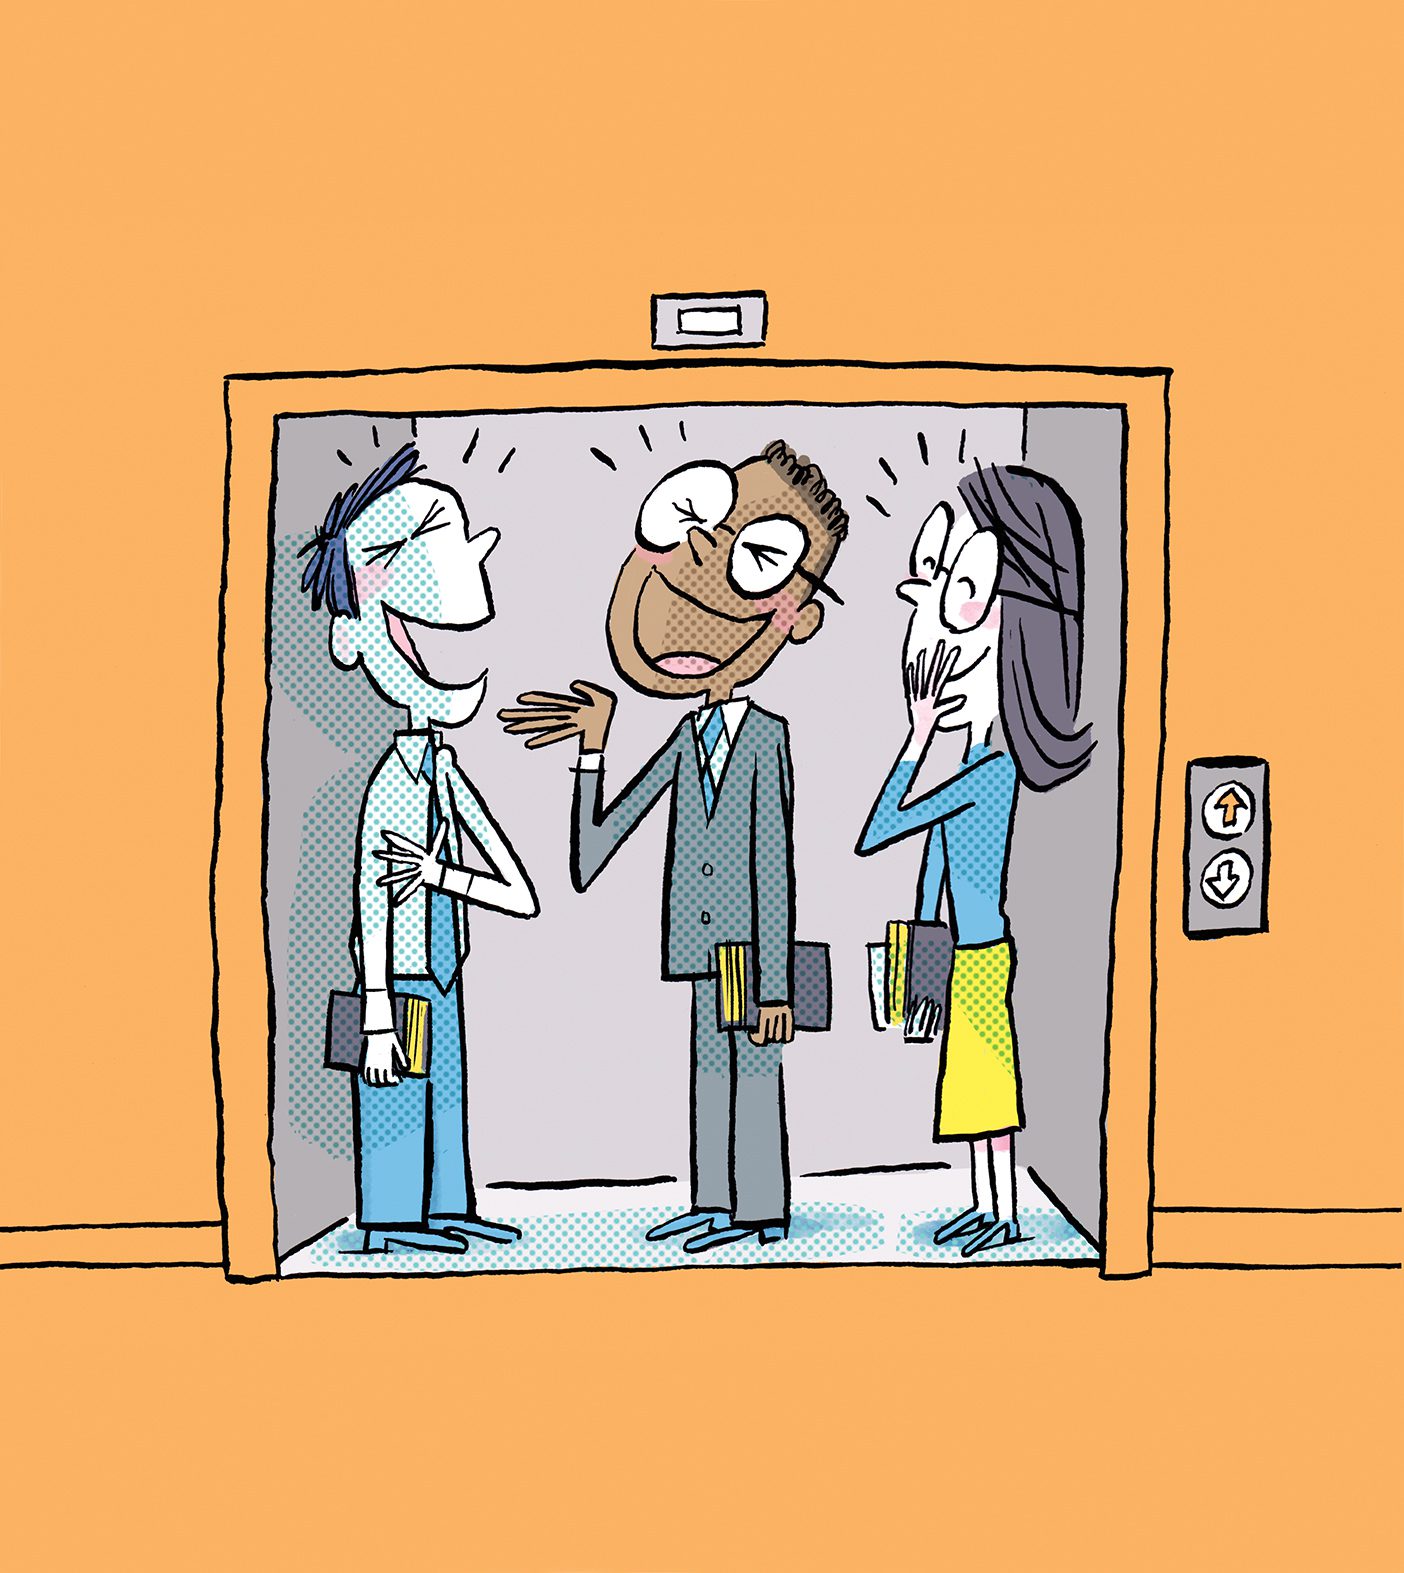 In this cartoon, three BYU students, dressed in Sunday best, laugh together as their elevator's doors open.